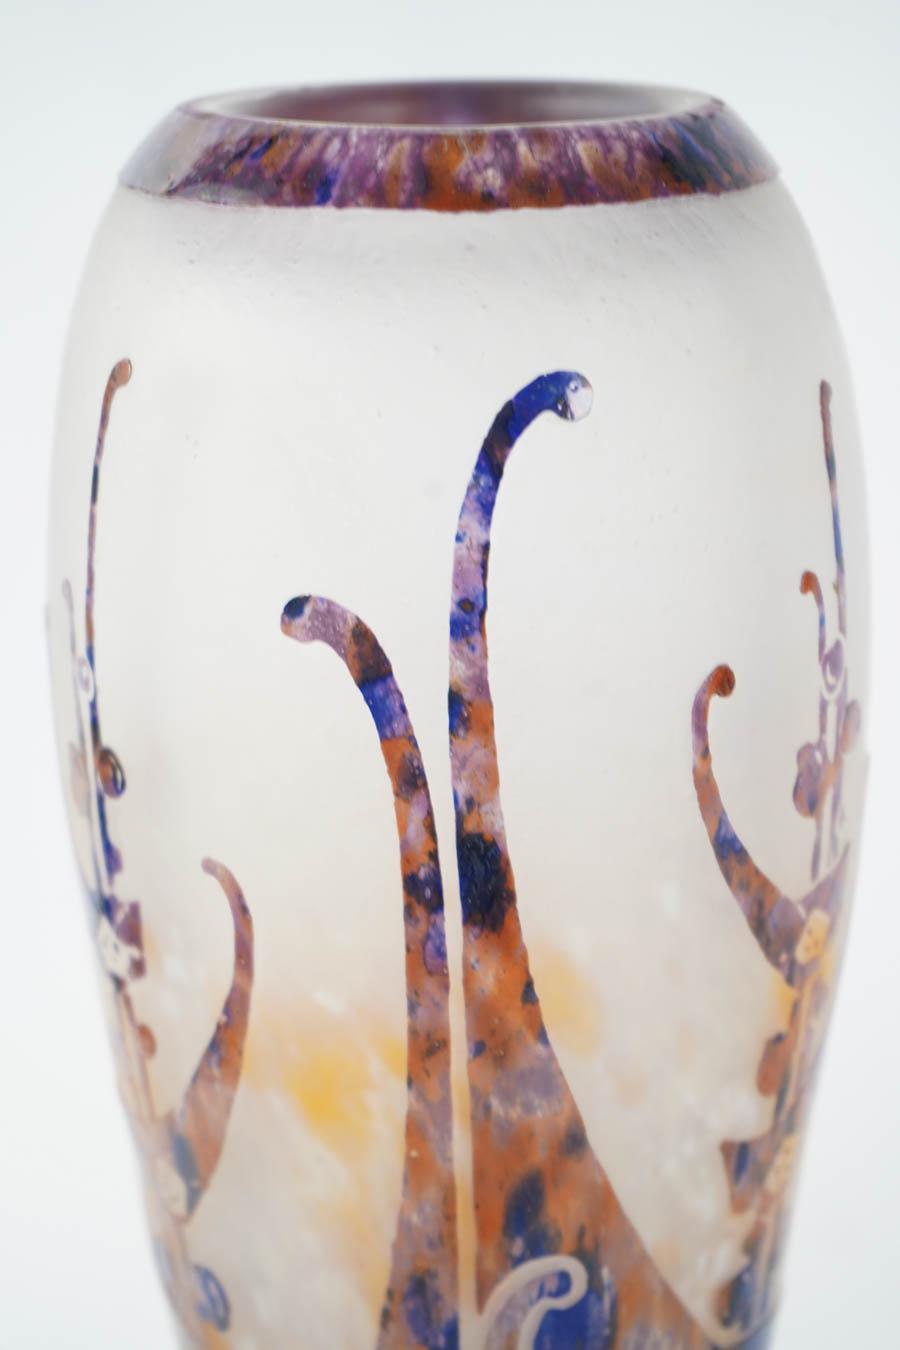 One of a kind glass vase by Le Verre Francais, signed on base, France, 1930s.
Le Verre Francais was created by Charles Schneider, who originally worked for Daum Nancy, and is renowned for its art glass with bright colors.
This piece is a